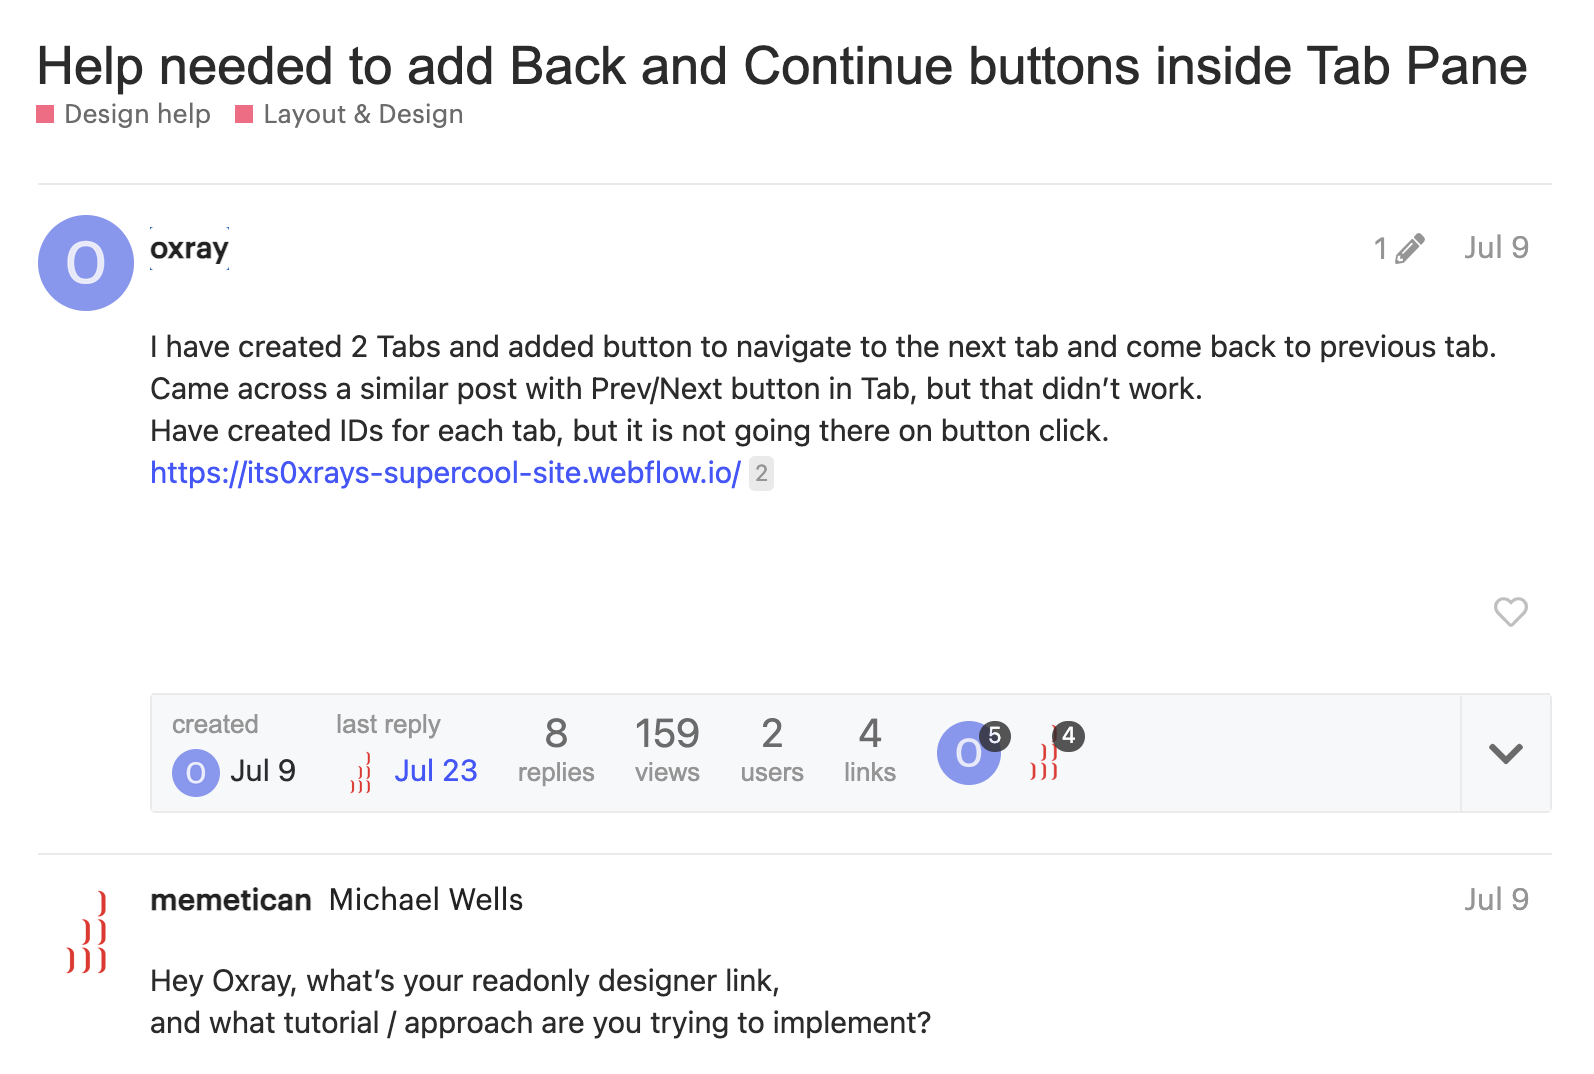 an example of a question and answer in Webflow Forum